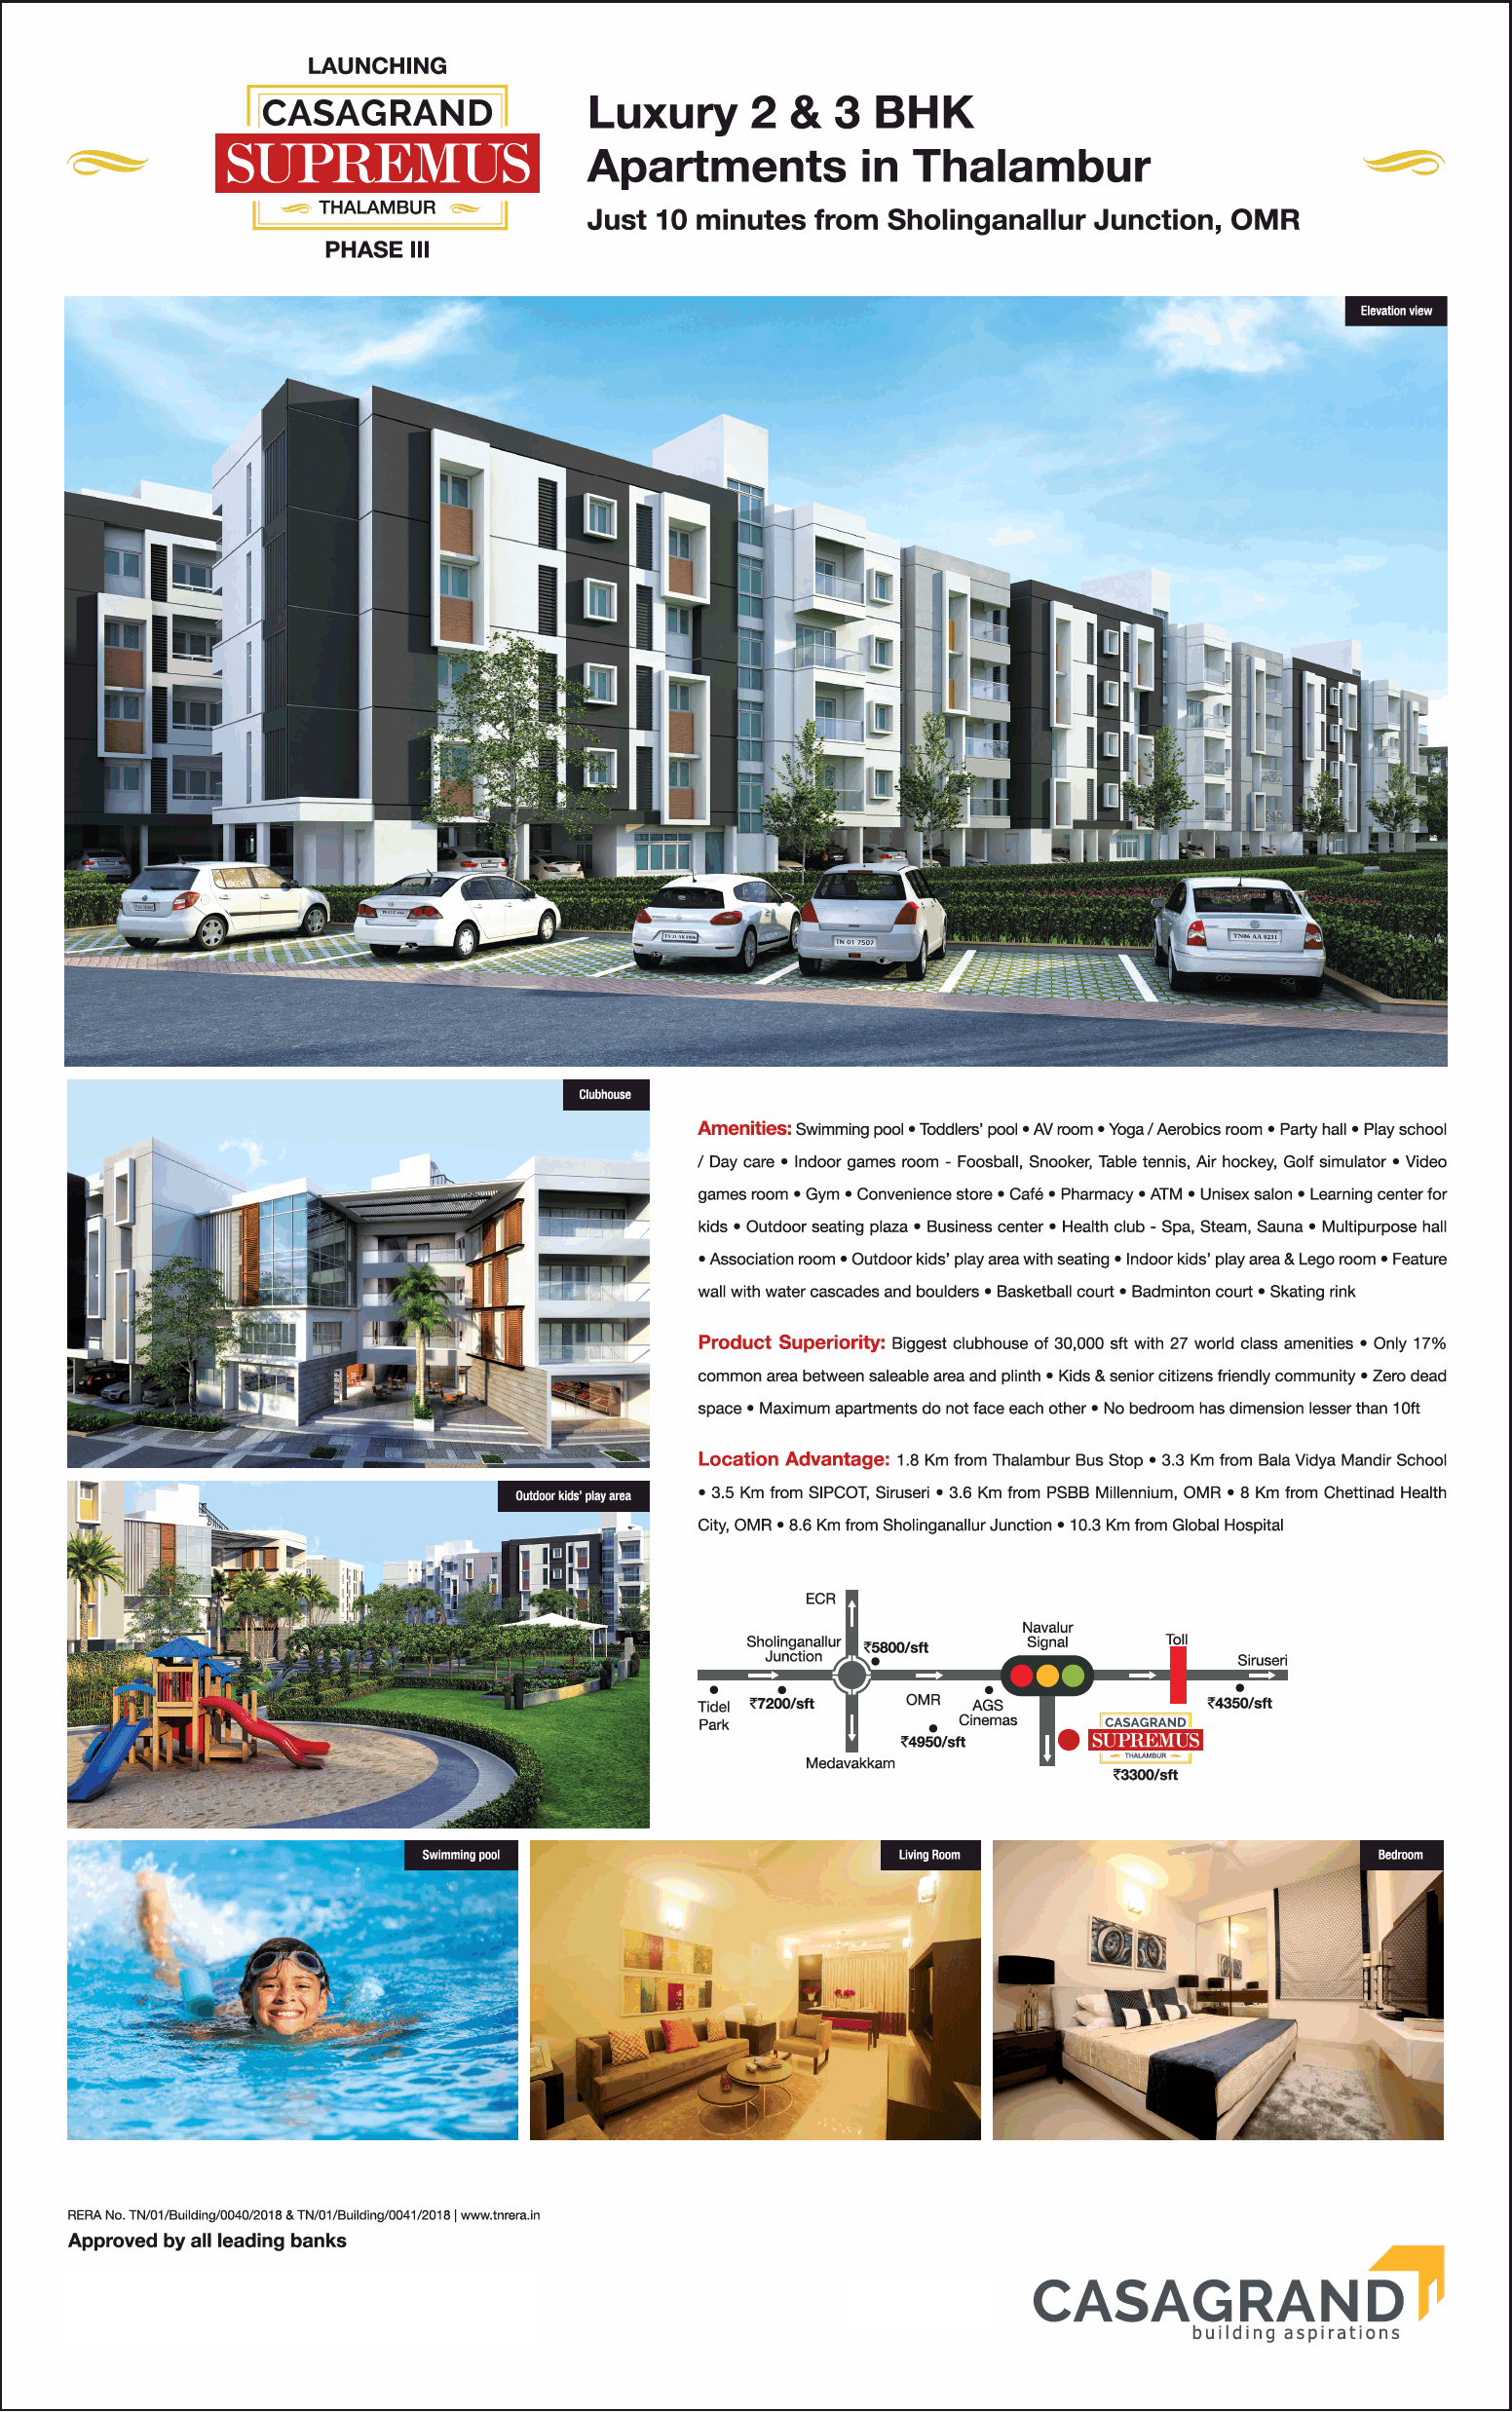 Launching luxury 2 & 3 bhk apartments at Casagrand Supremus Phase 3 in Chennai